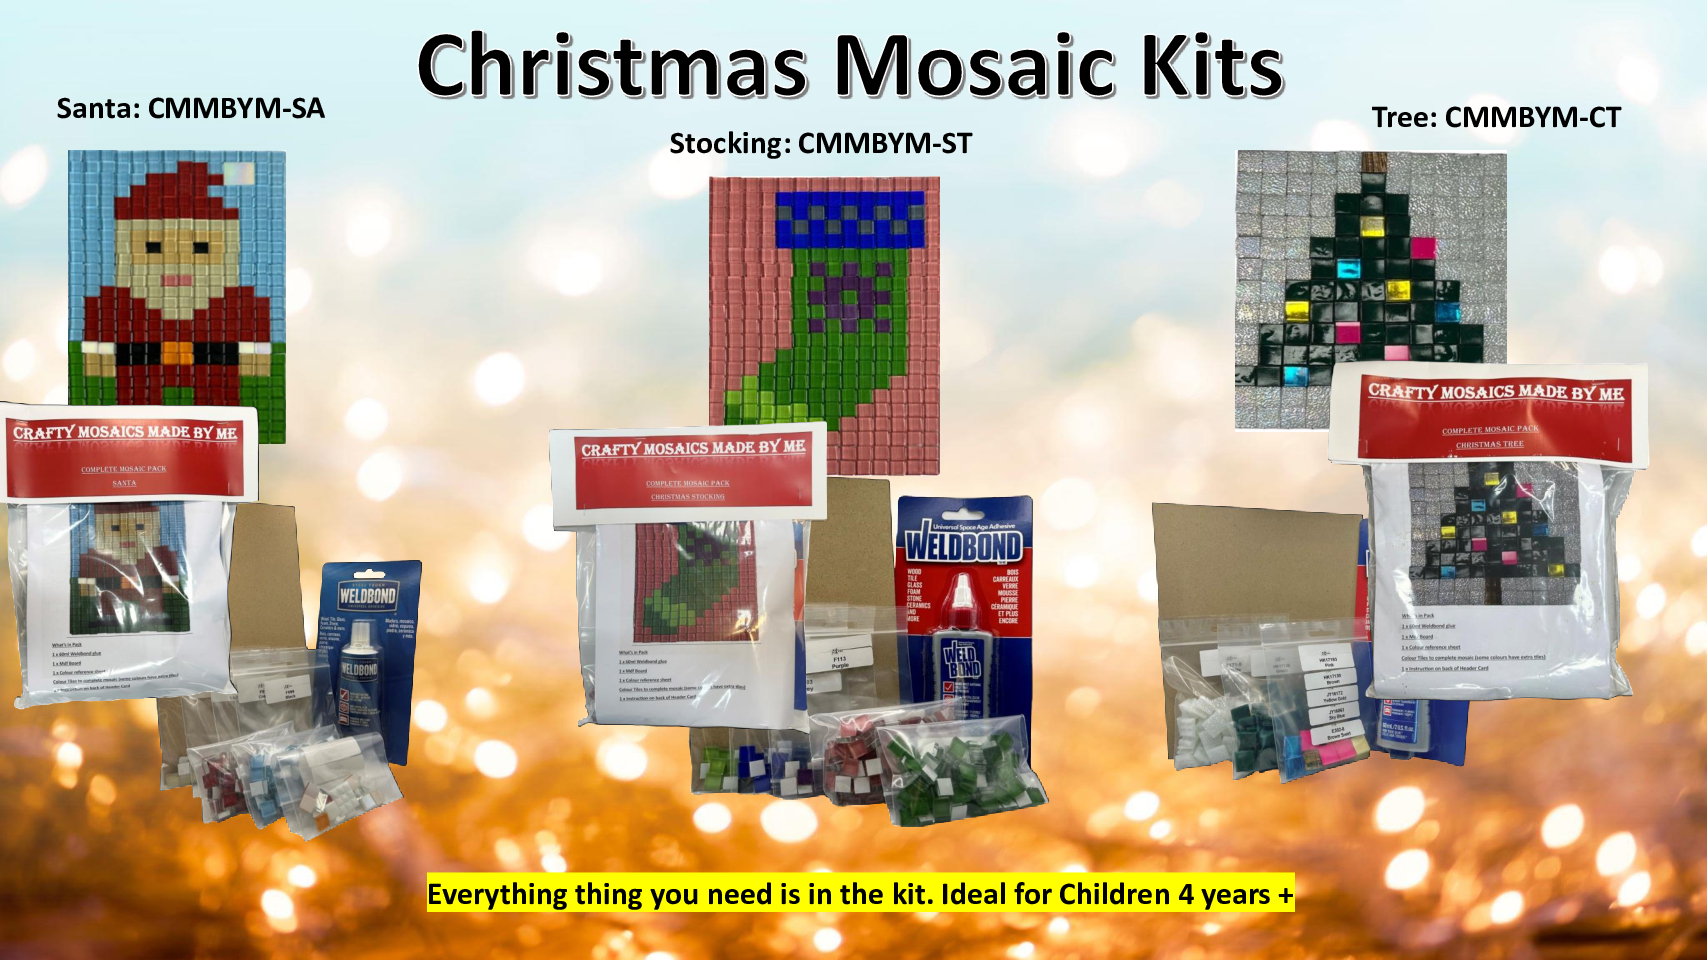 Kits for Kids